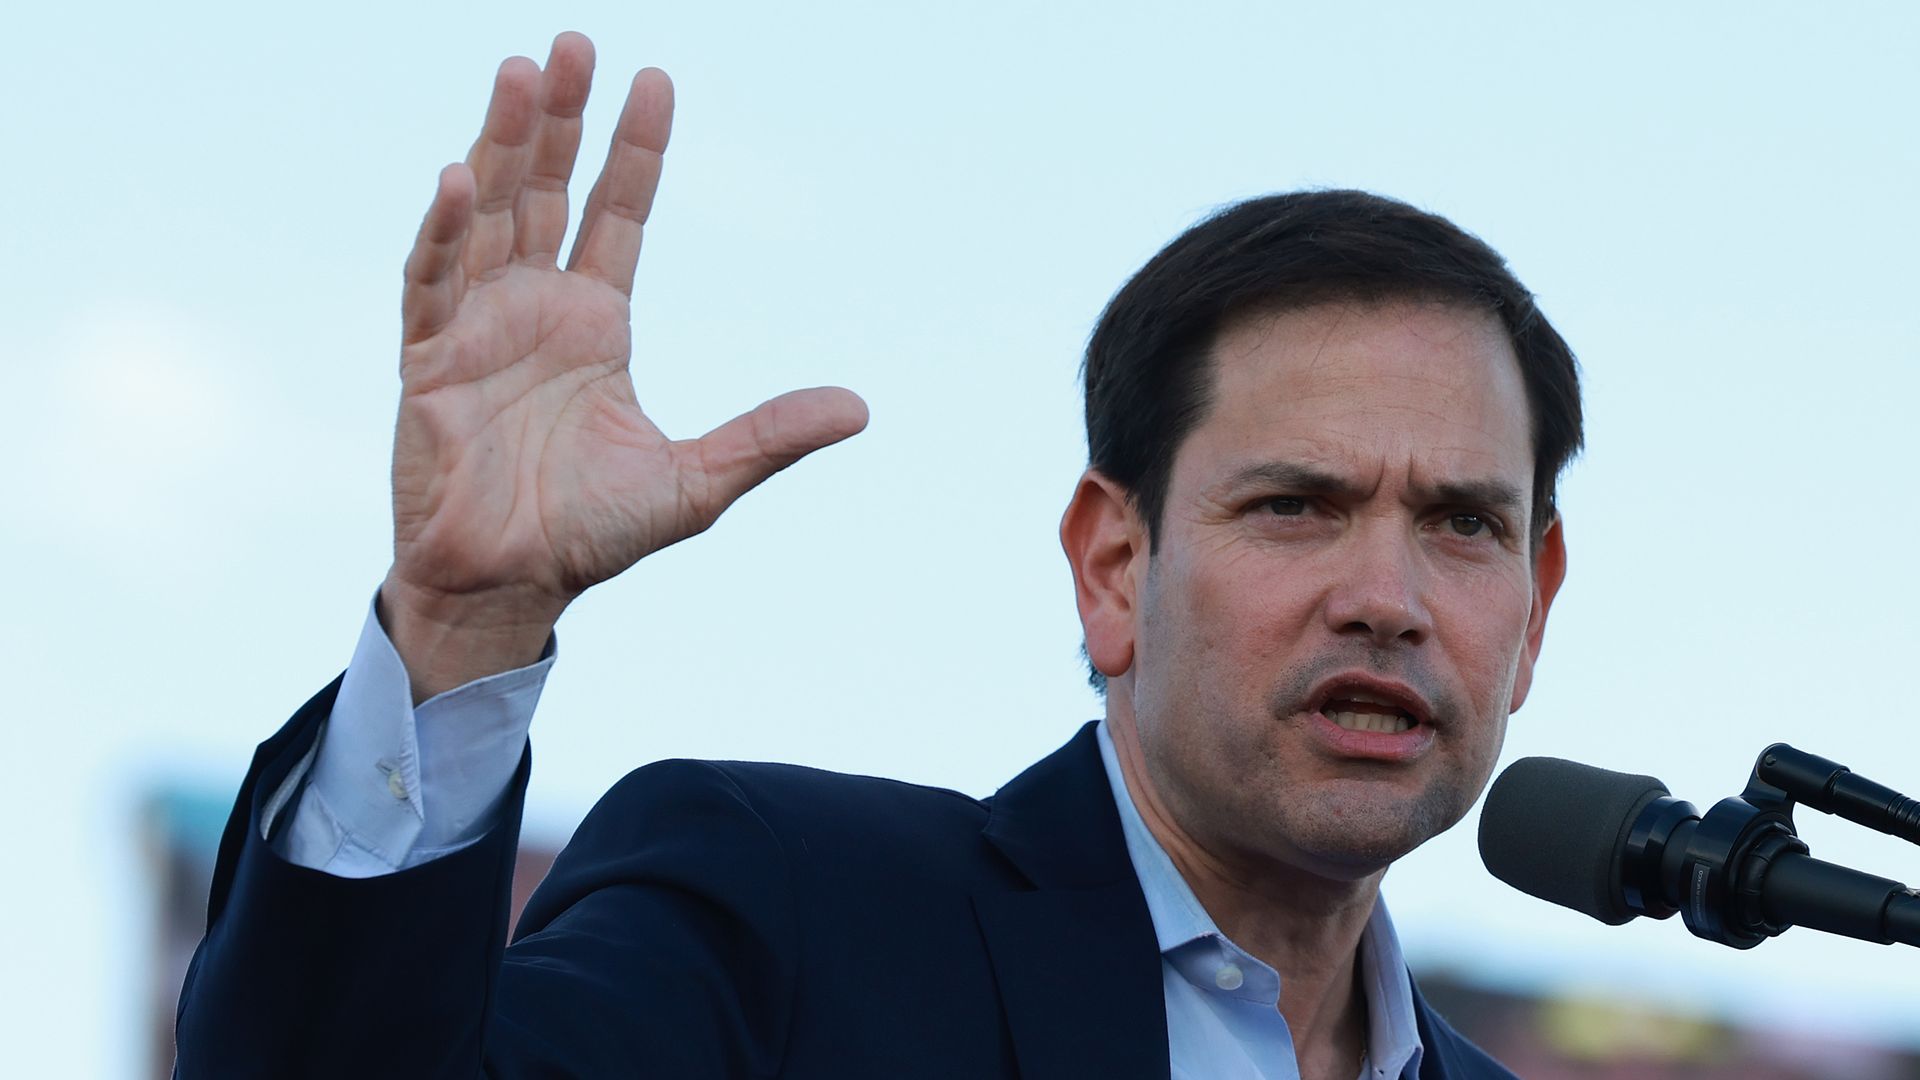 Sen. Marco Rubio speaks at a rally in Miami on Nov. 6. Photo: Joe Raedle/Getty Images